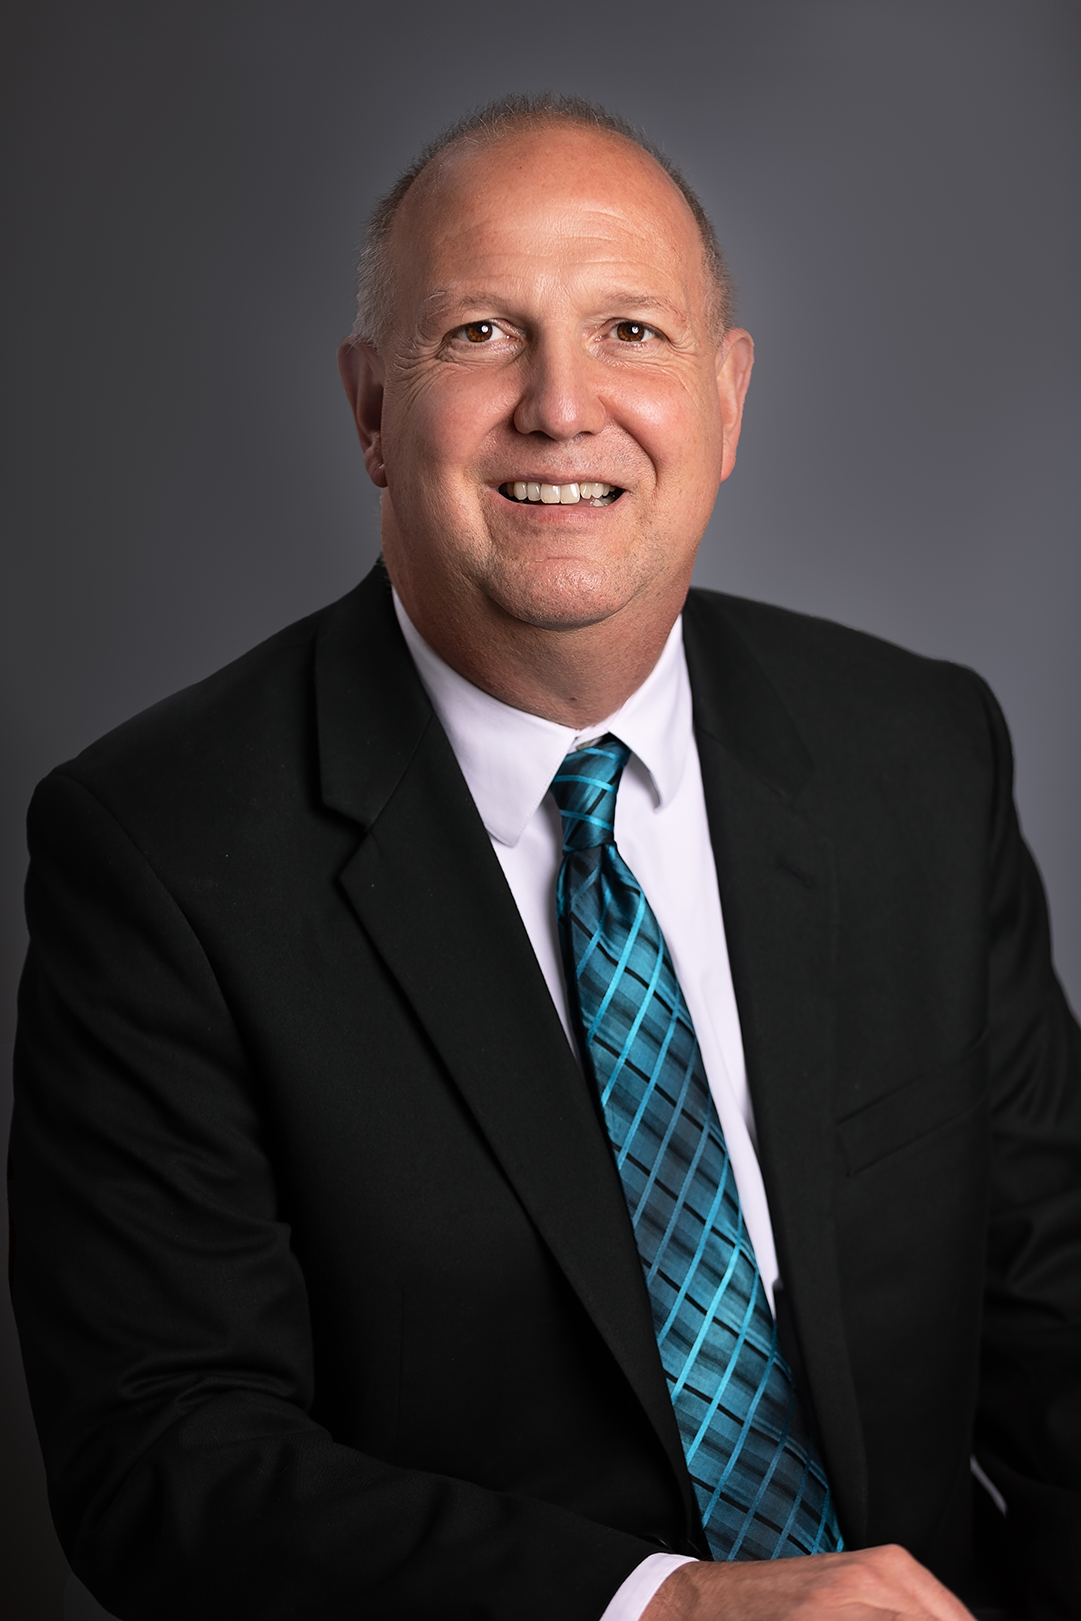 Image for Benton County’s Chief Financial Officer Rick Crager promoted to Assistant County Administrator